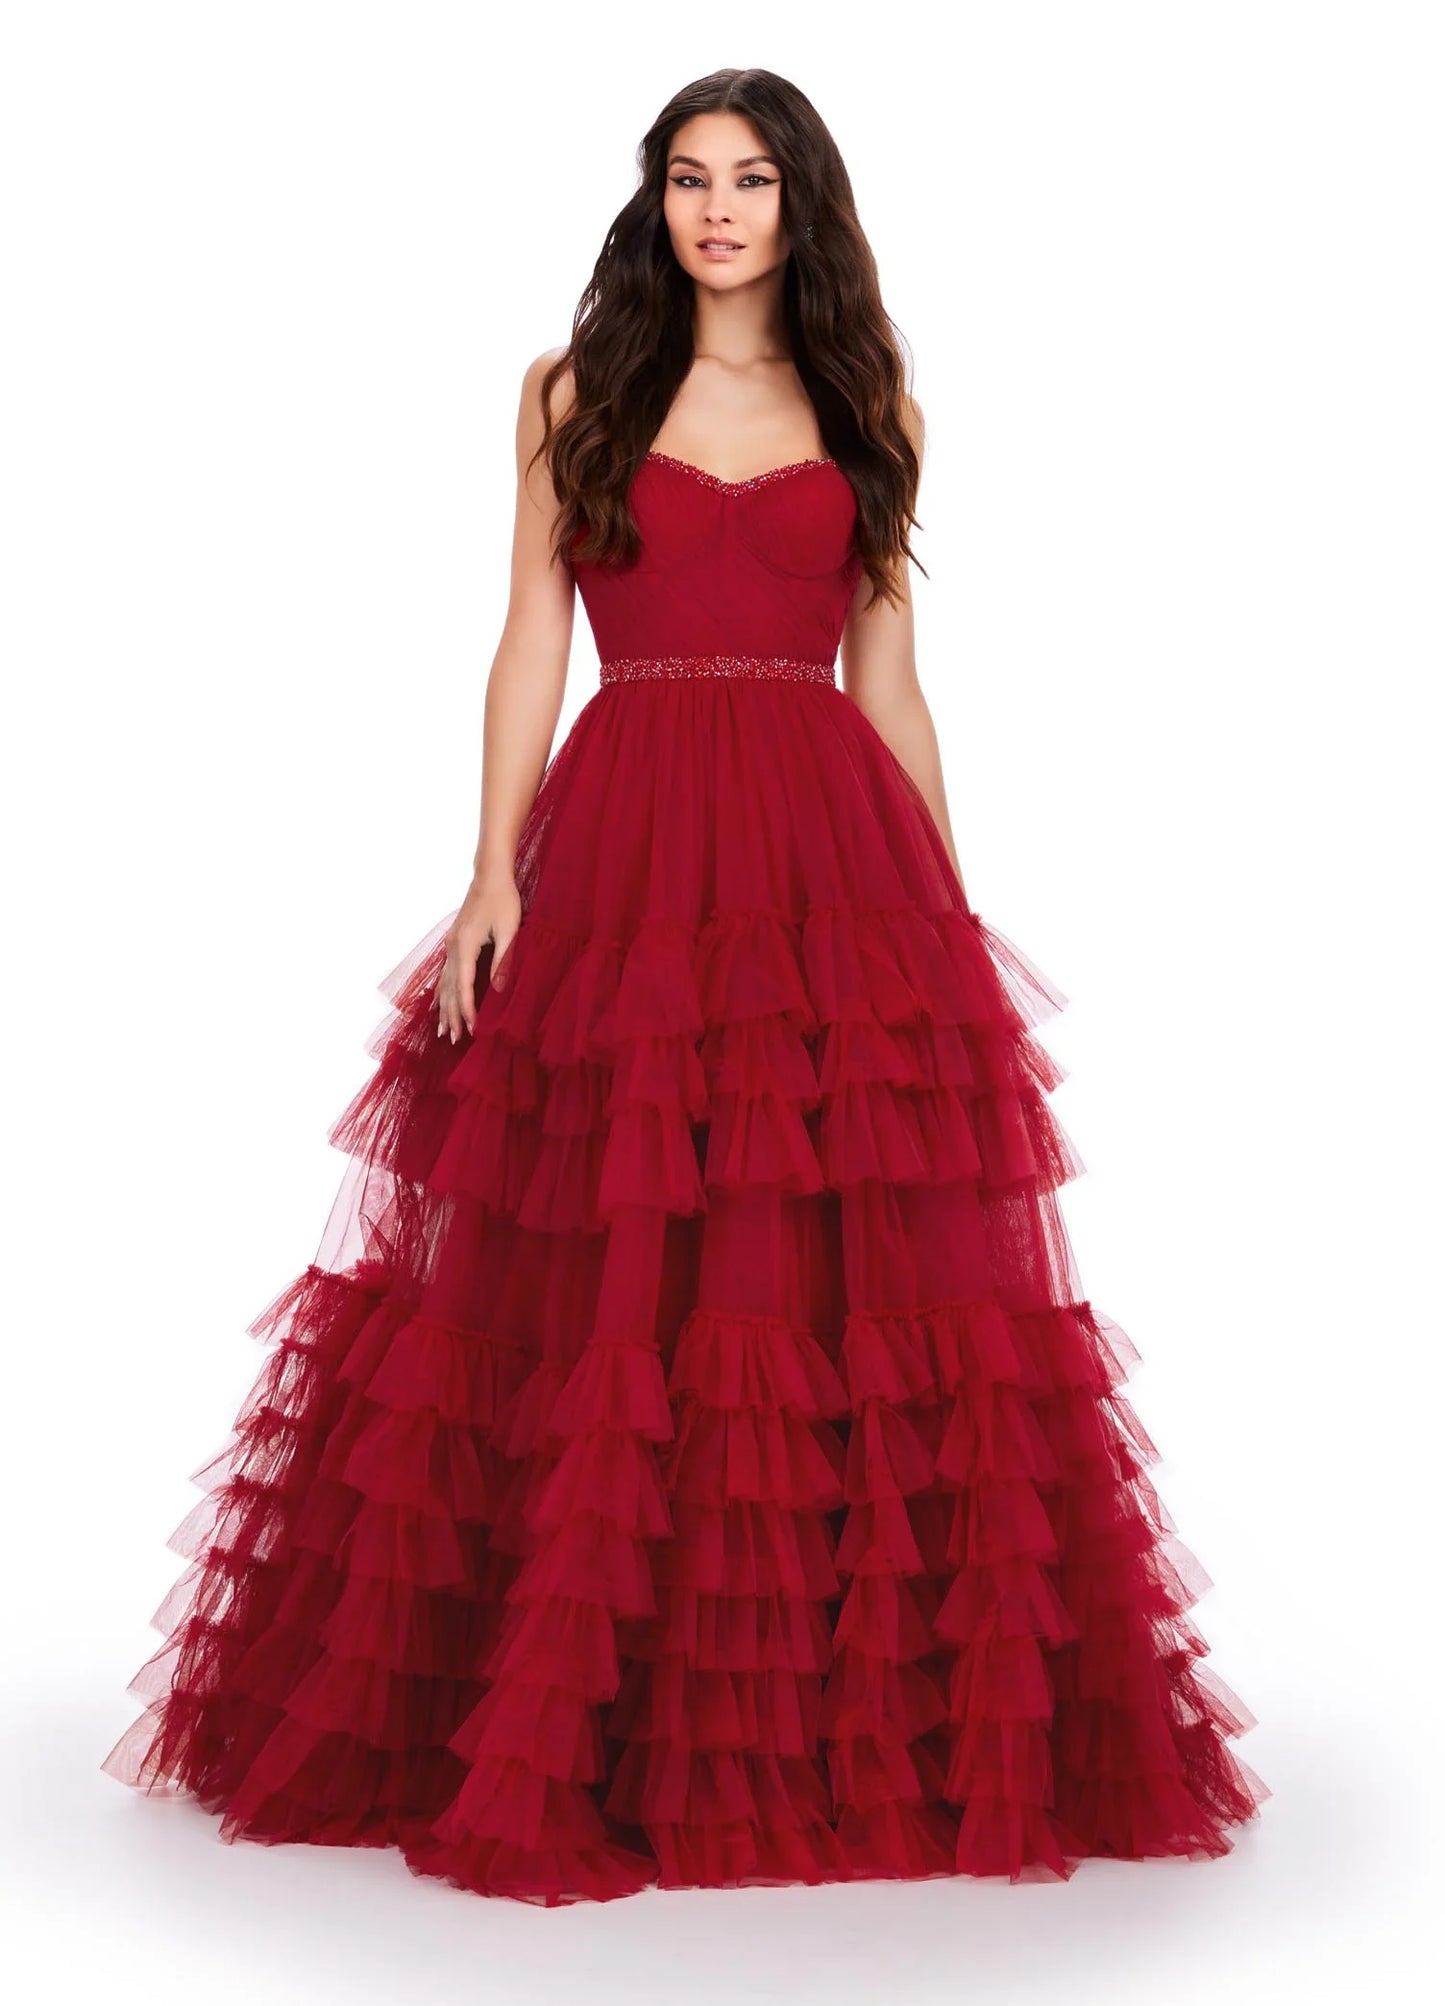 The Ashley Lauren11603 Long Tulle Ruffle Layer Ballgown Prom Dress is the perfect choice for your special occasion. With a beaded corset and ruffled layers for movement, this gown adds the perfect amount of glamour and elegance.